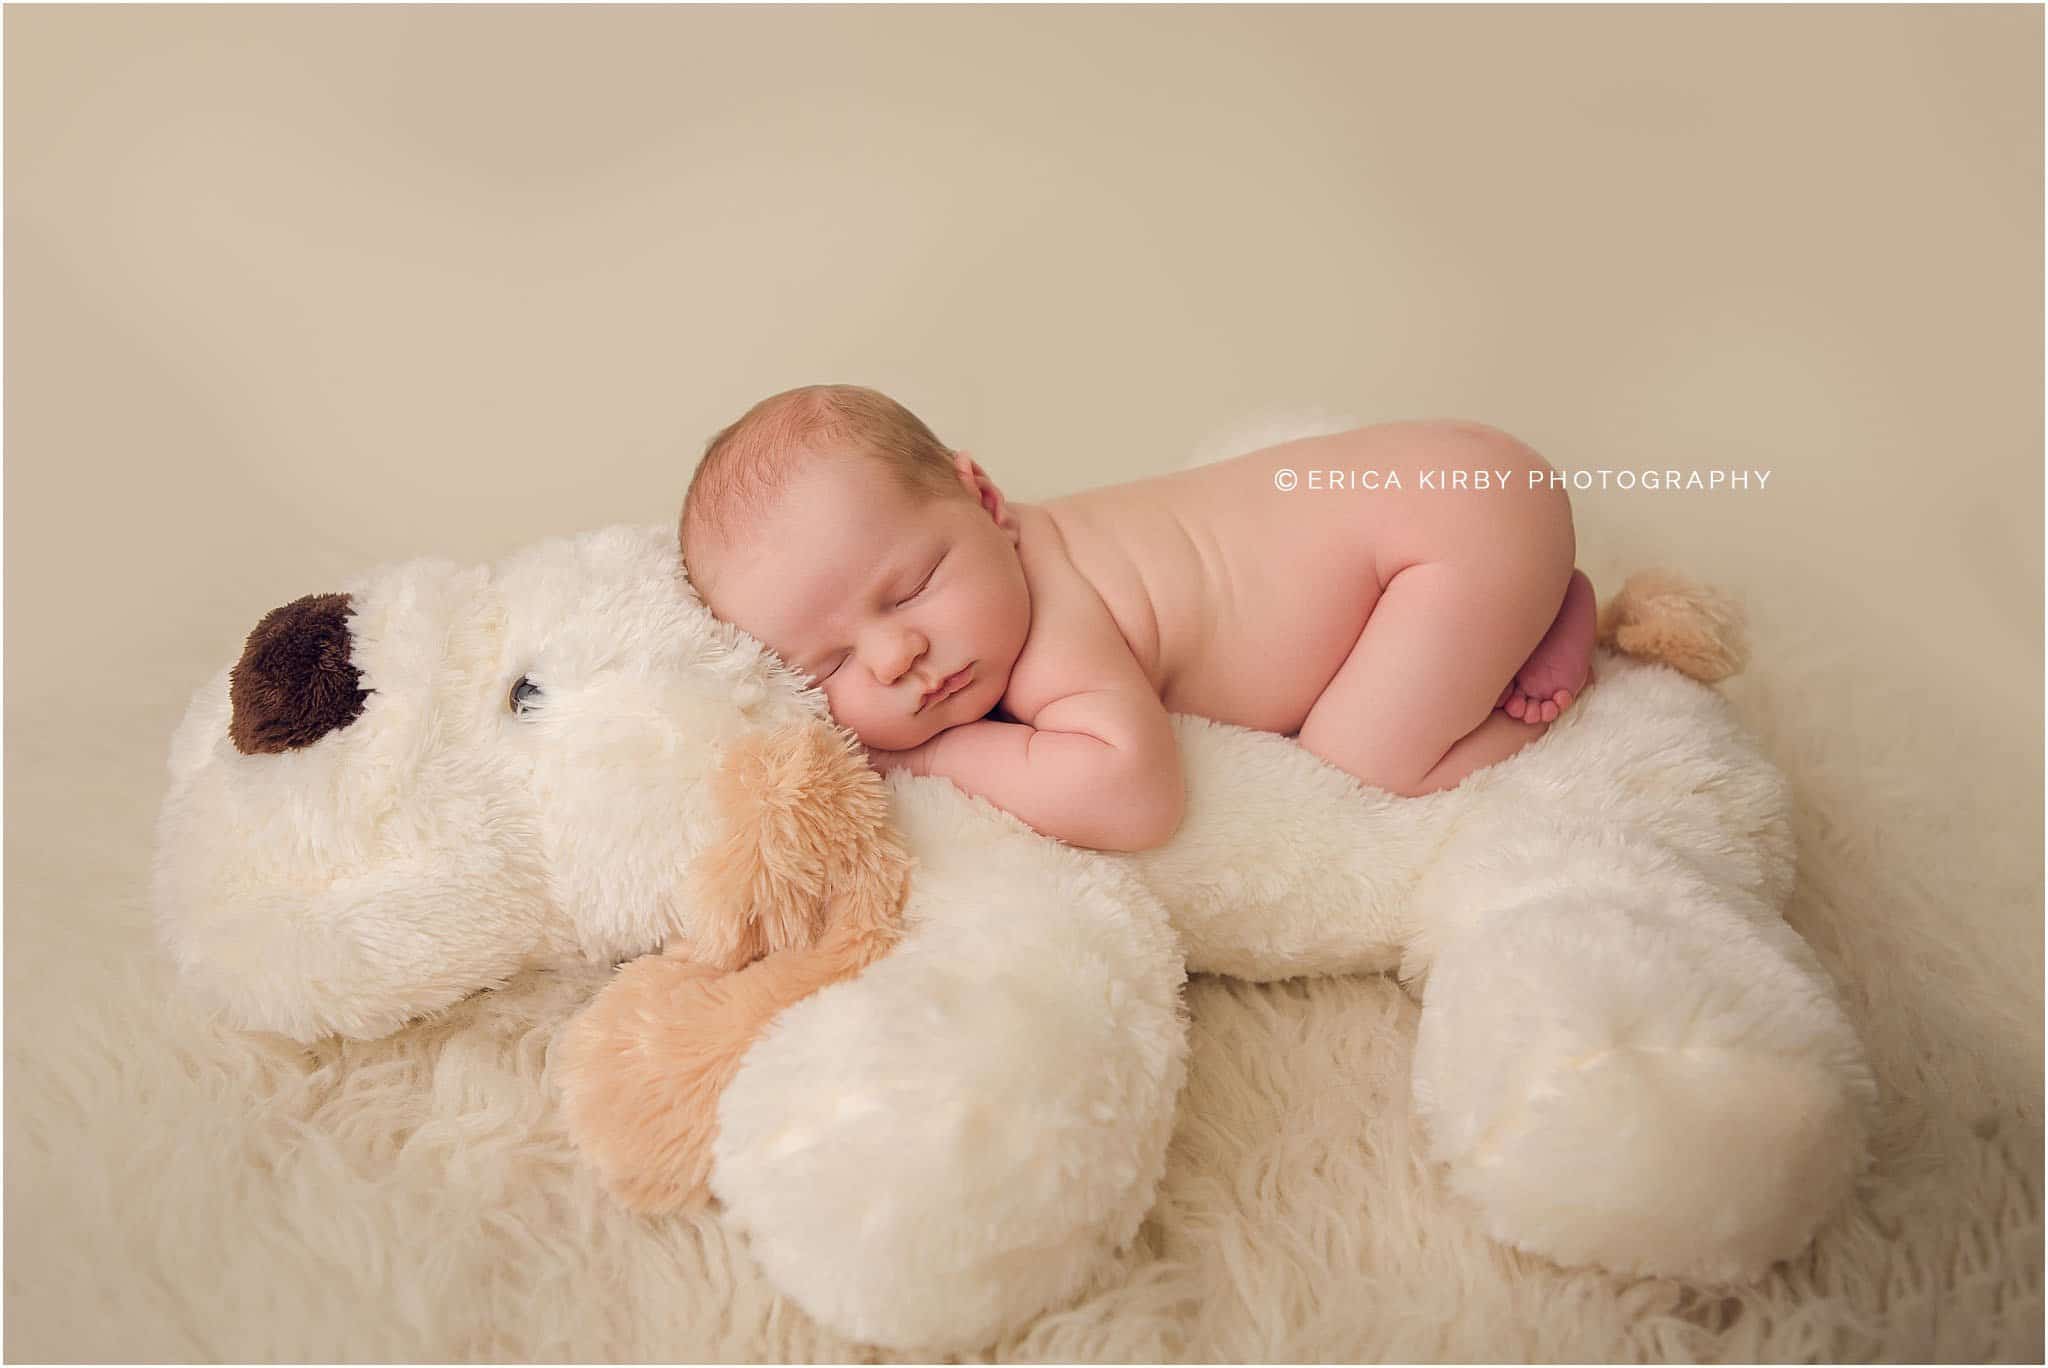 Baby boy newborn session in Bentonville AR with soft colors | NWA newborn photographer Erica Kirby Photography